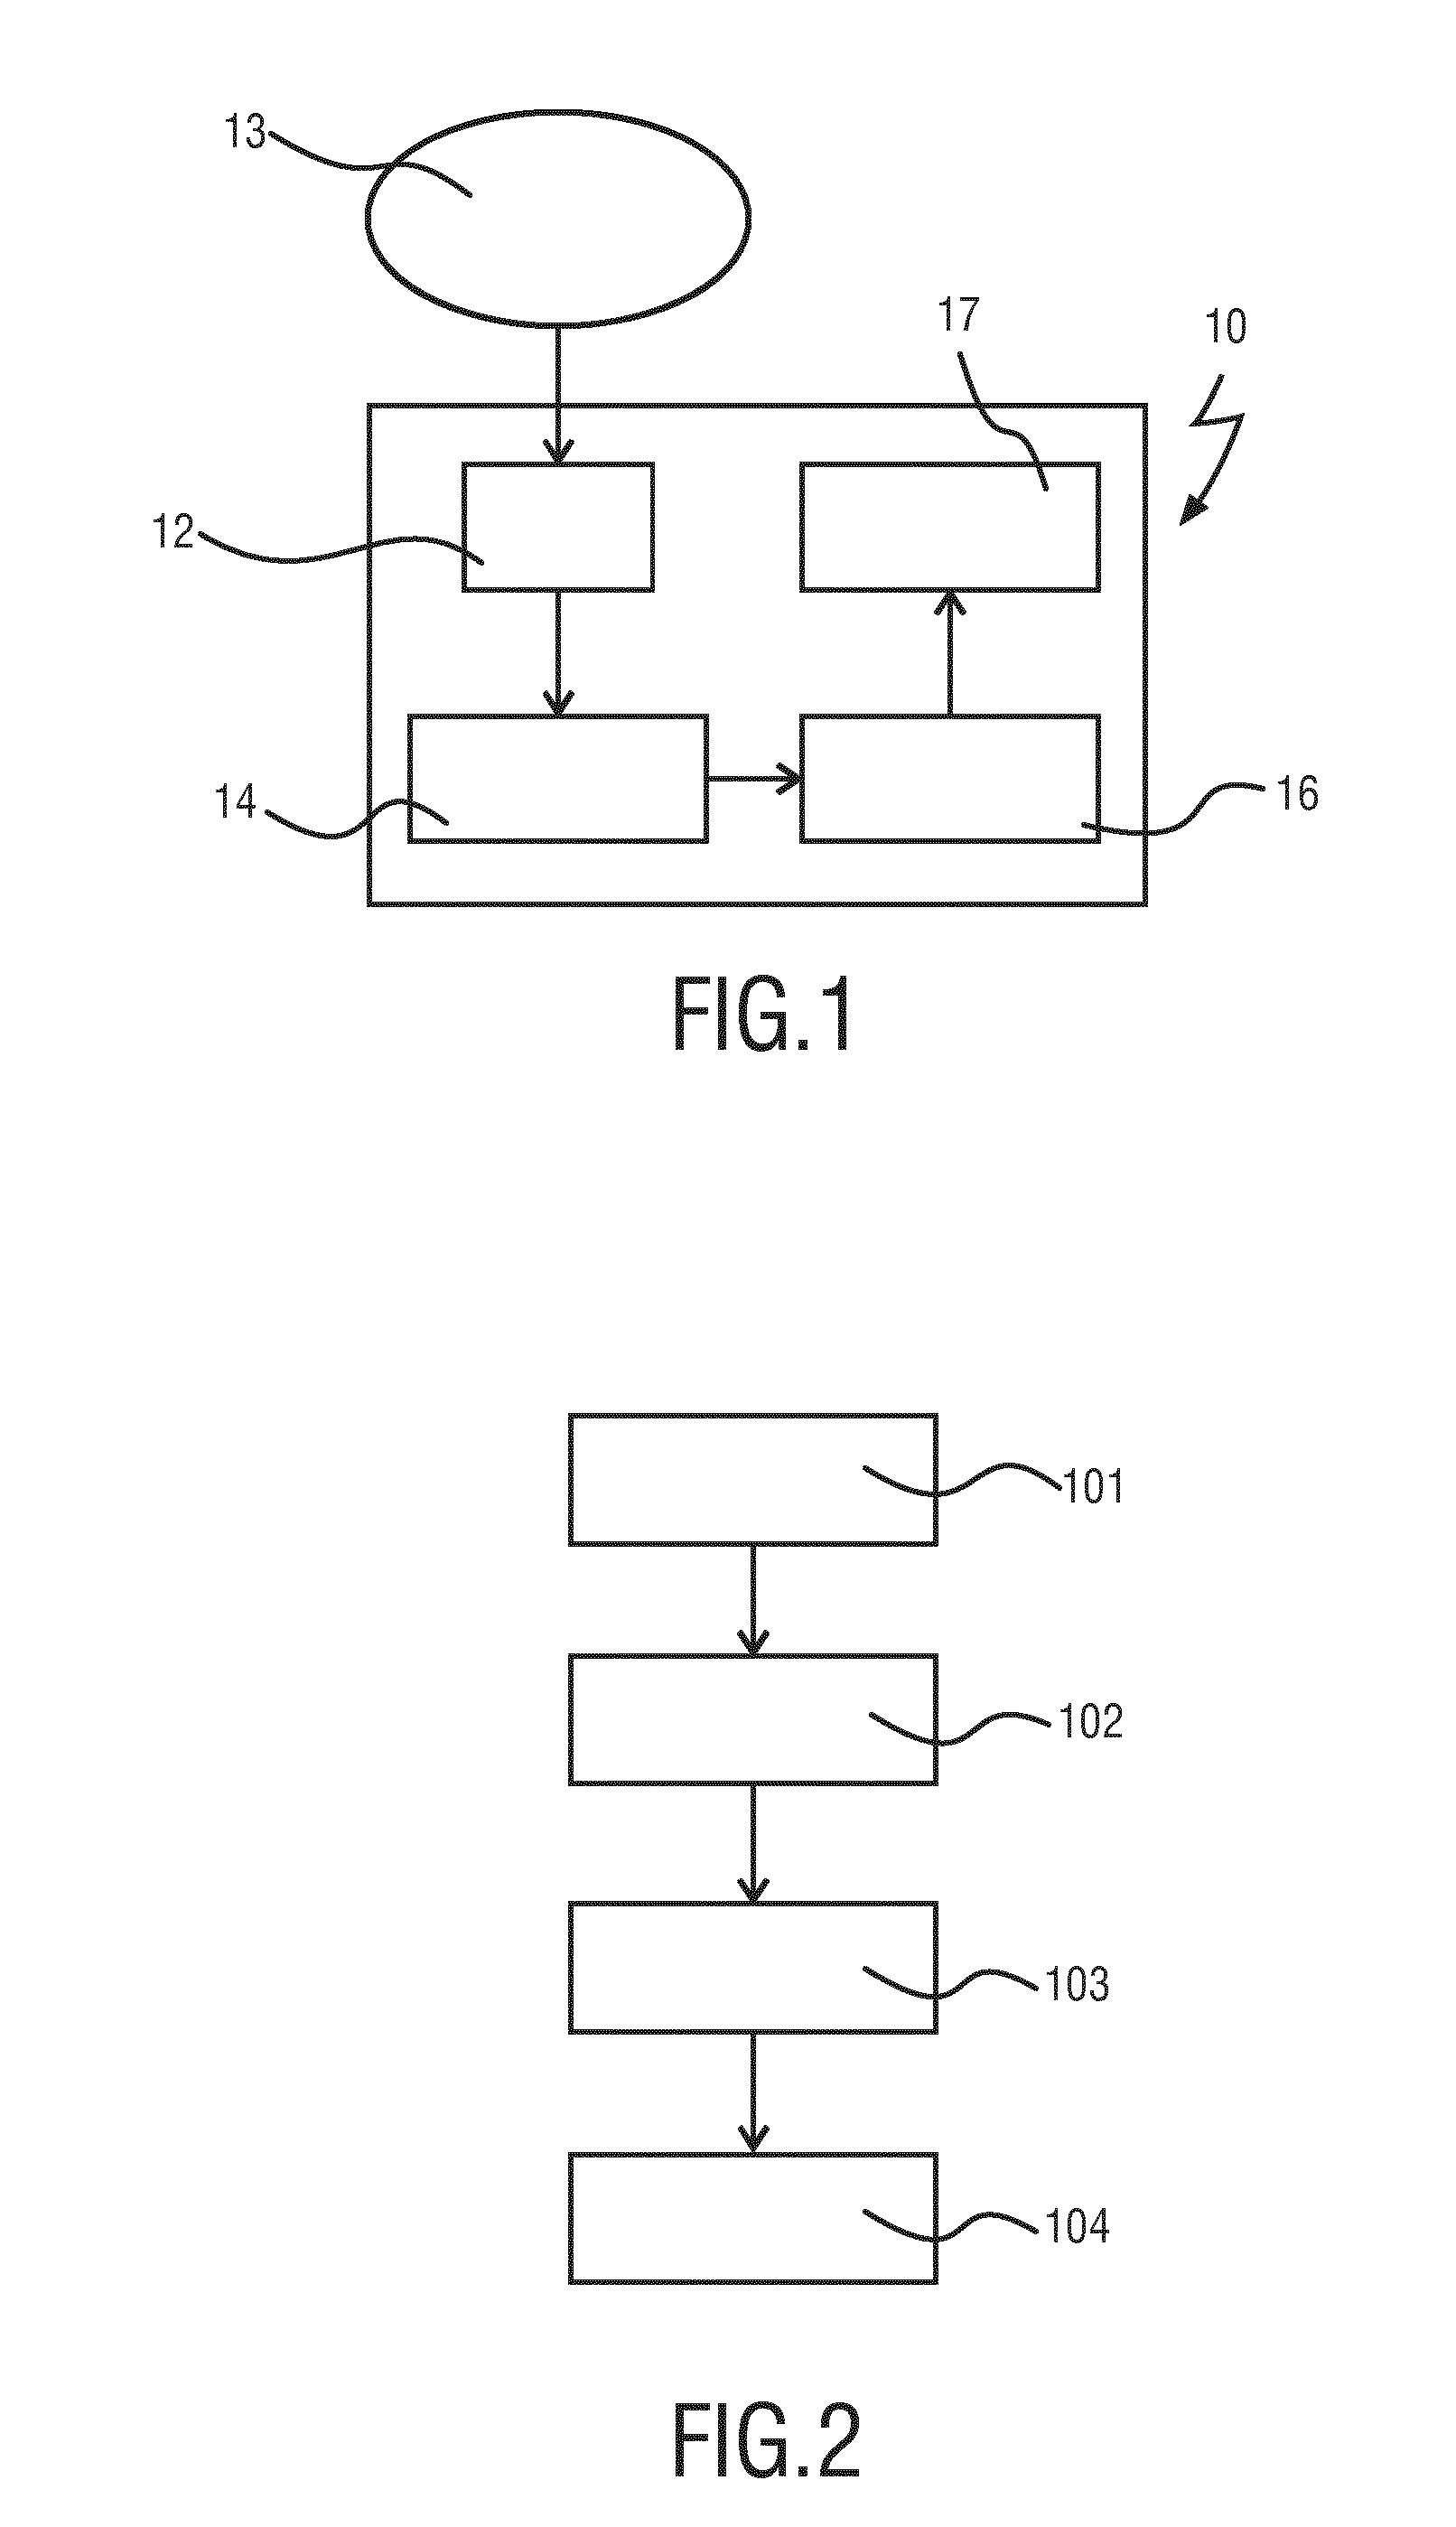 Processor for processing skin conductance data and device for detecting at least one stage of burnout and/or chronic fatigue syndrome of a living being